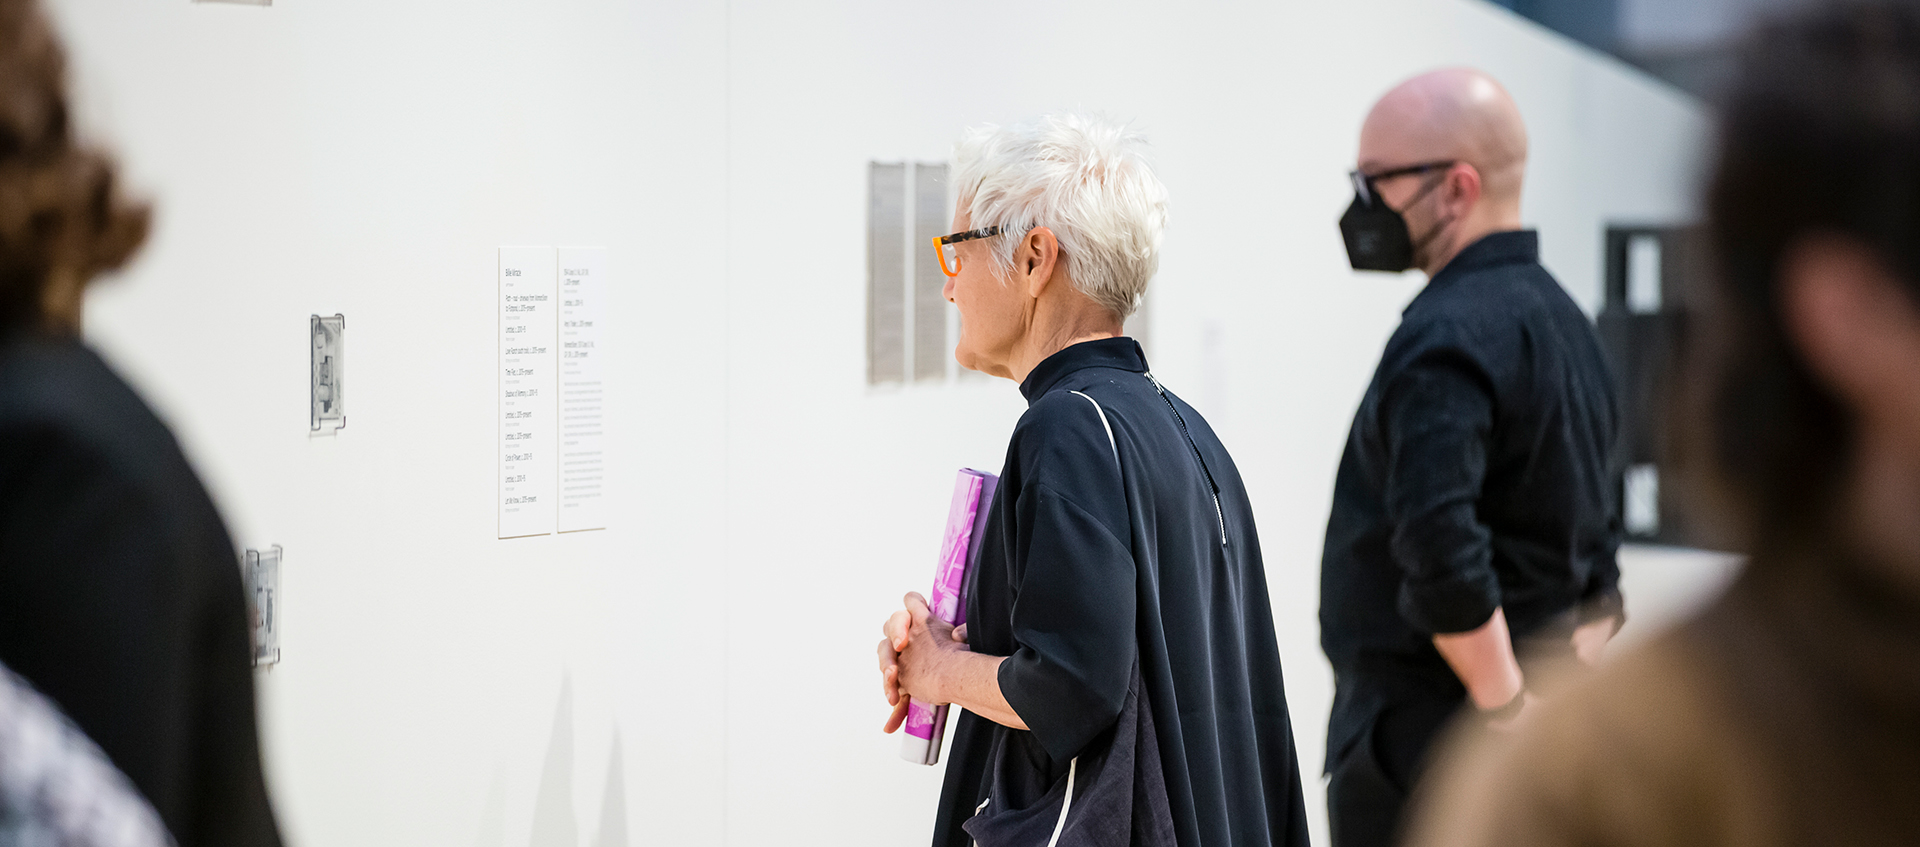 Two people read labels on a white gallery wall. The person in the foreground holds a rolled-up publication from the exhibition Sharing Circles: Carol Newhouse and the WomanShare Collective.